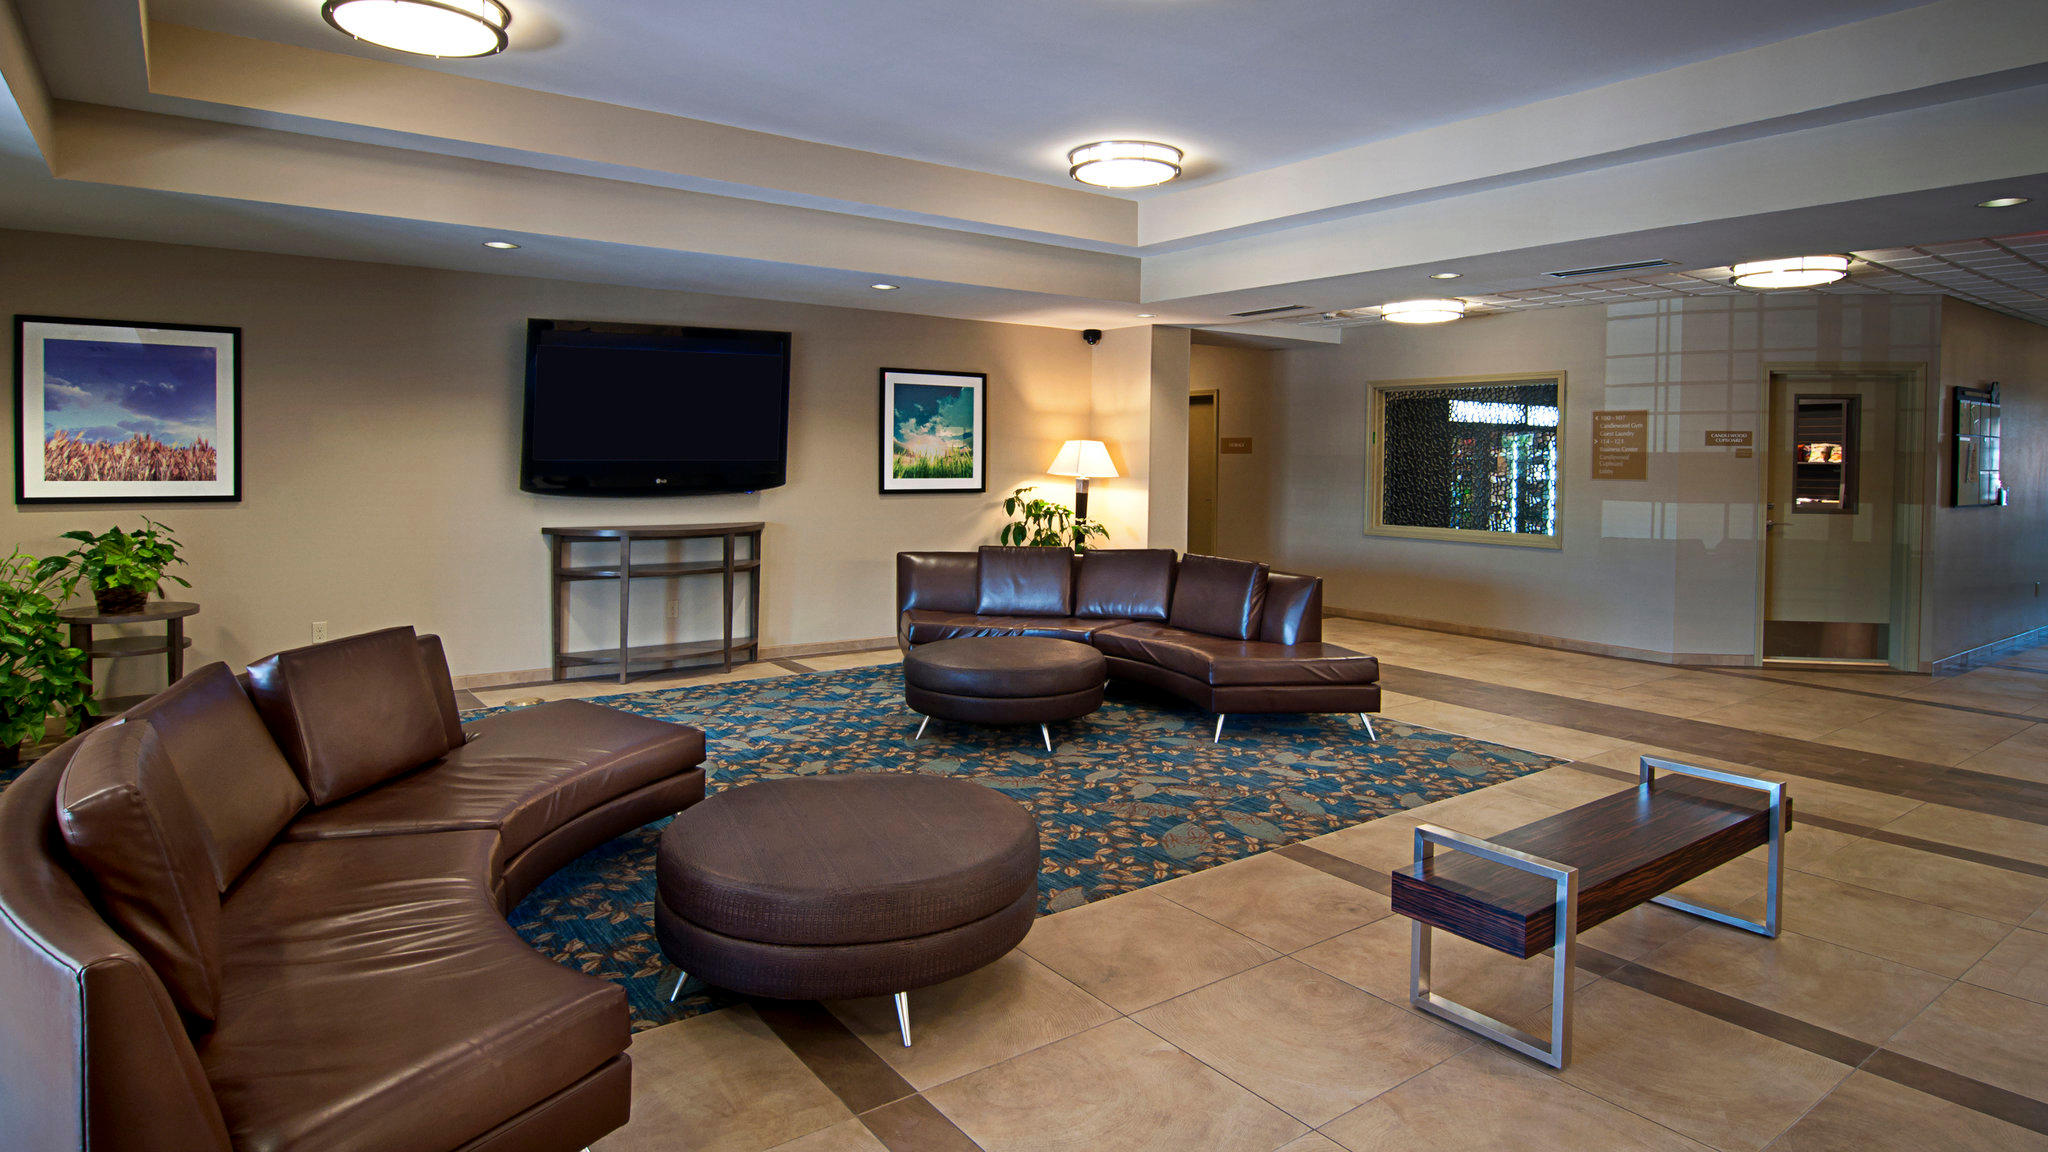 Candlewood Suites Sioux Falls Photo